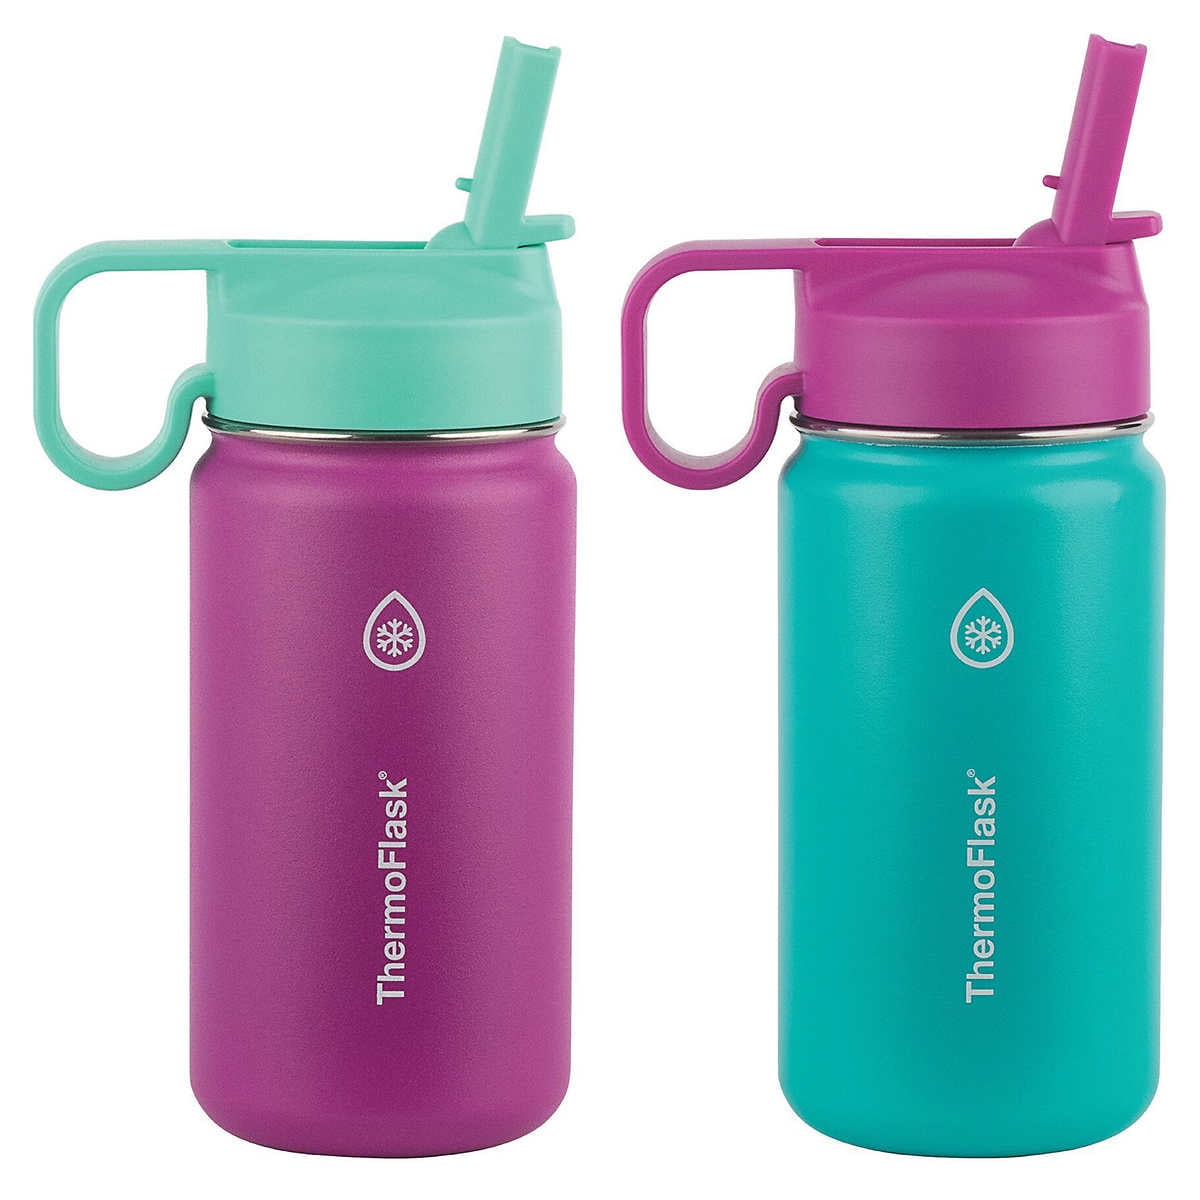 Thermoflask Kids 14 oz Stainless Steel Insulated Water Bottle 2-pack 